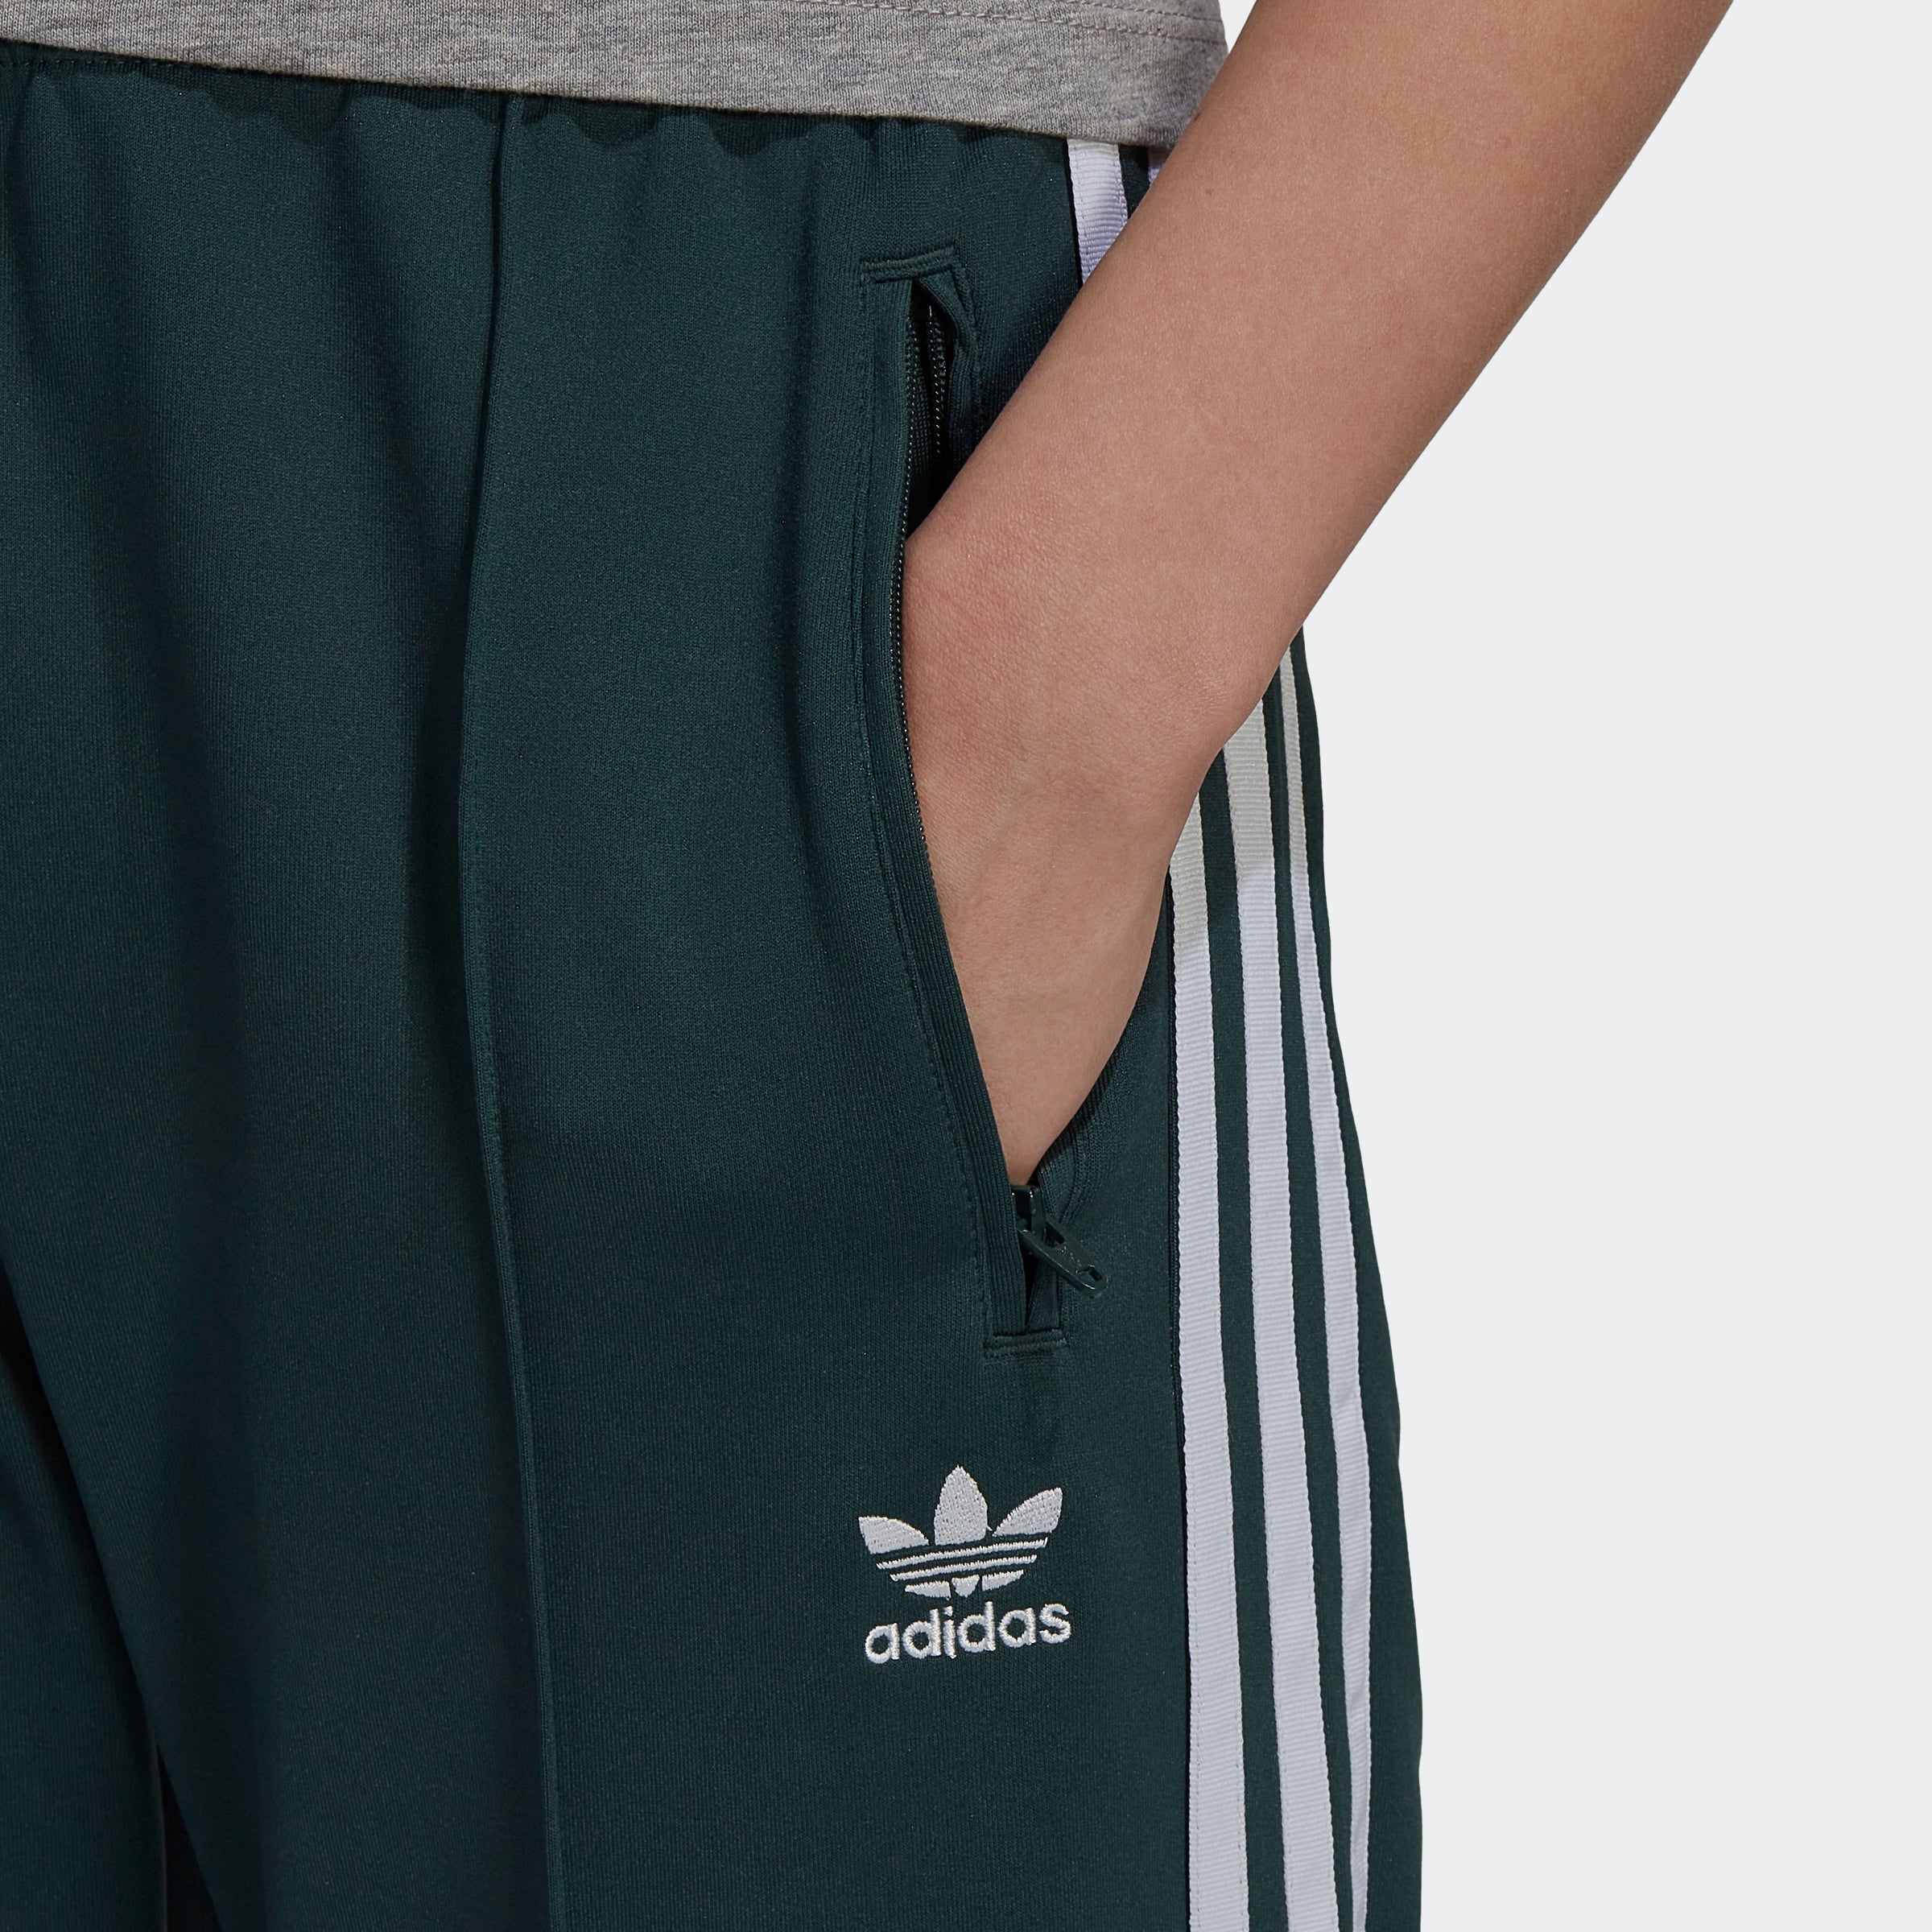 Women's adidas SST Track Pants Mineral Green